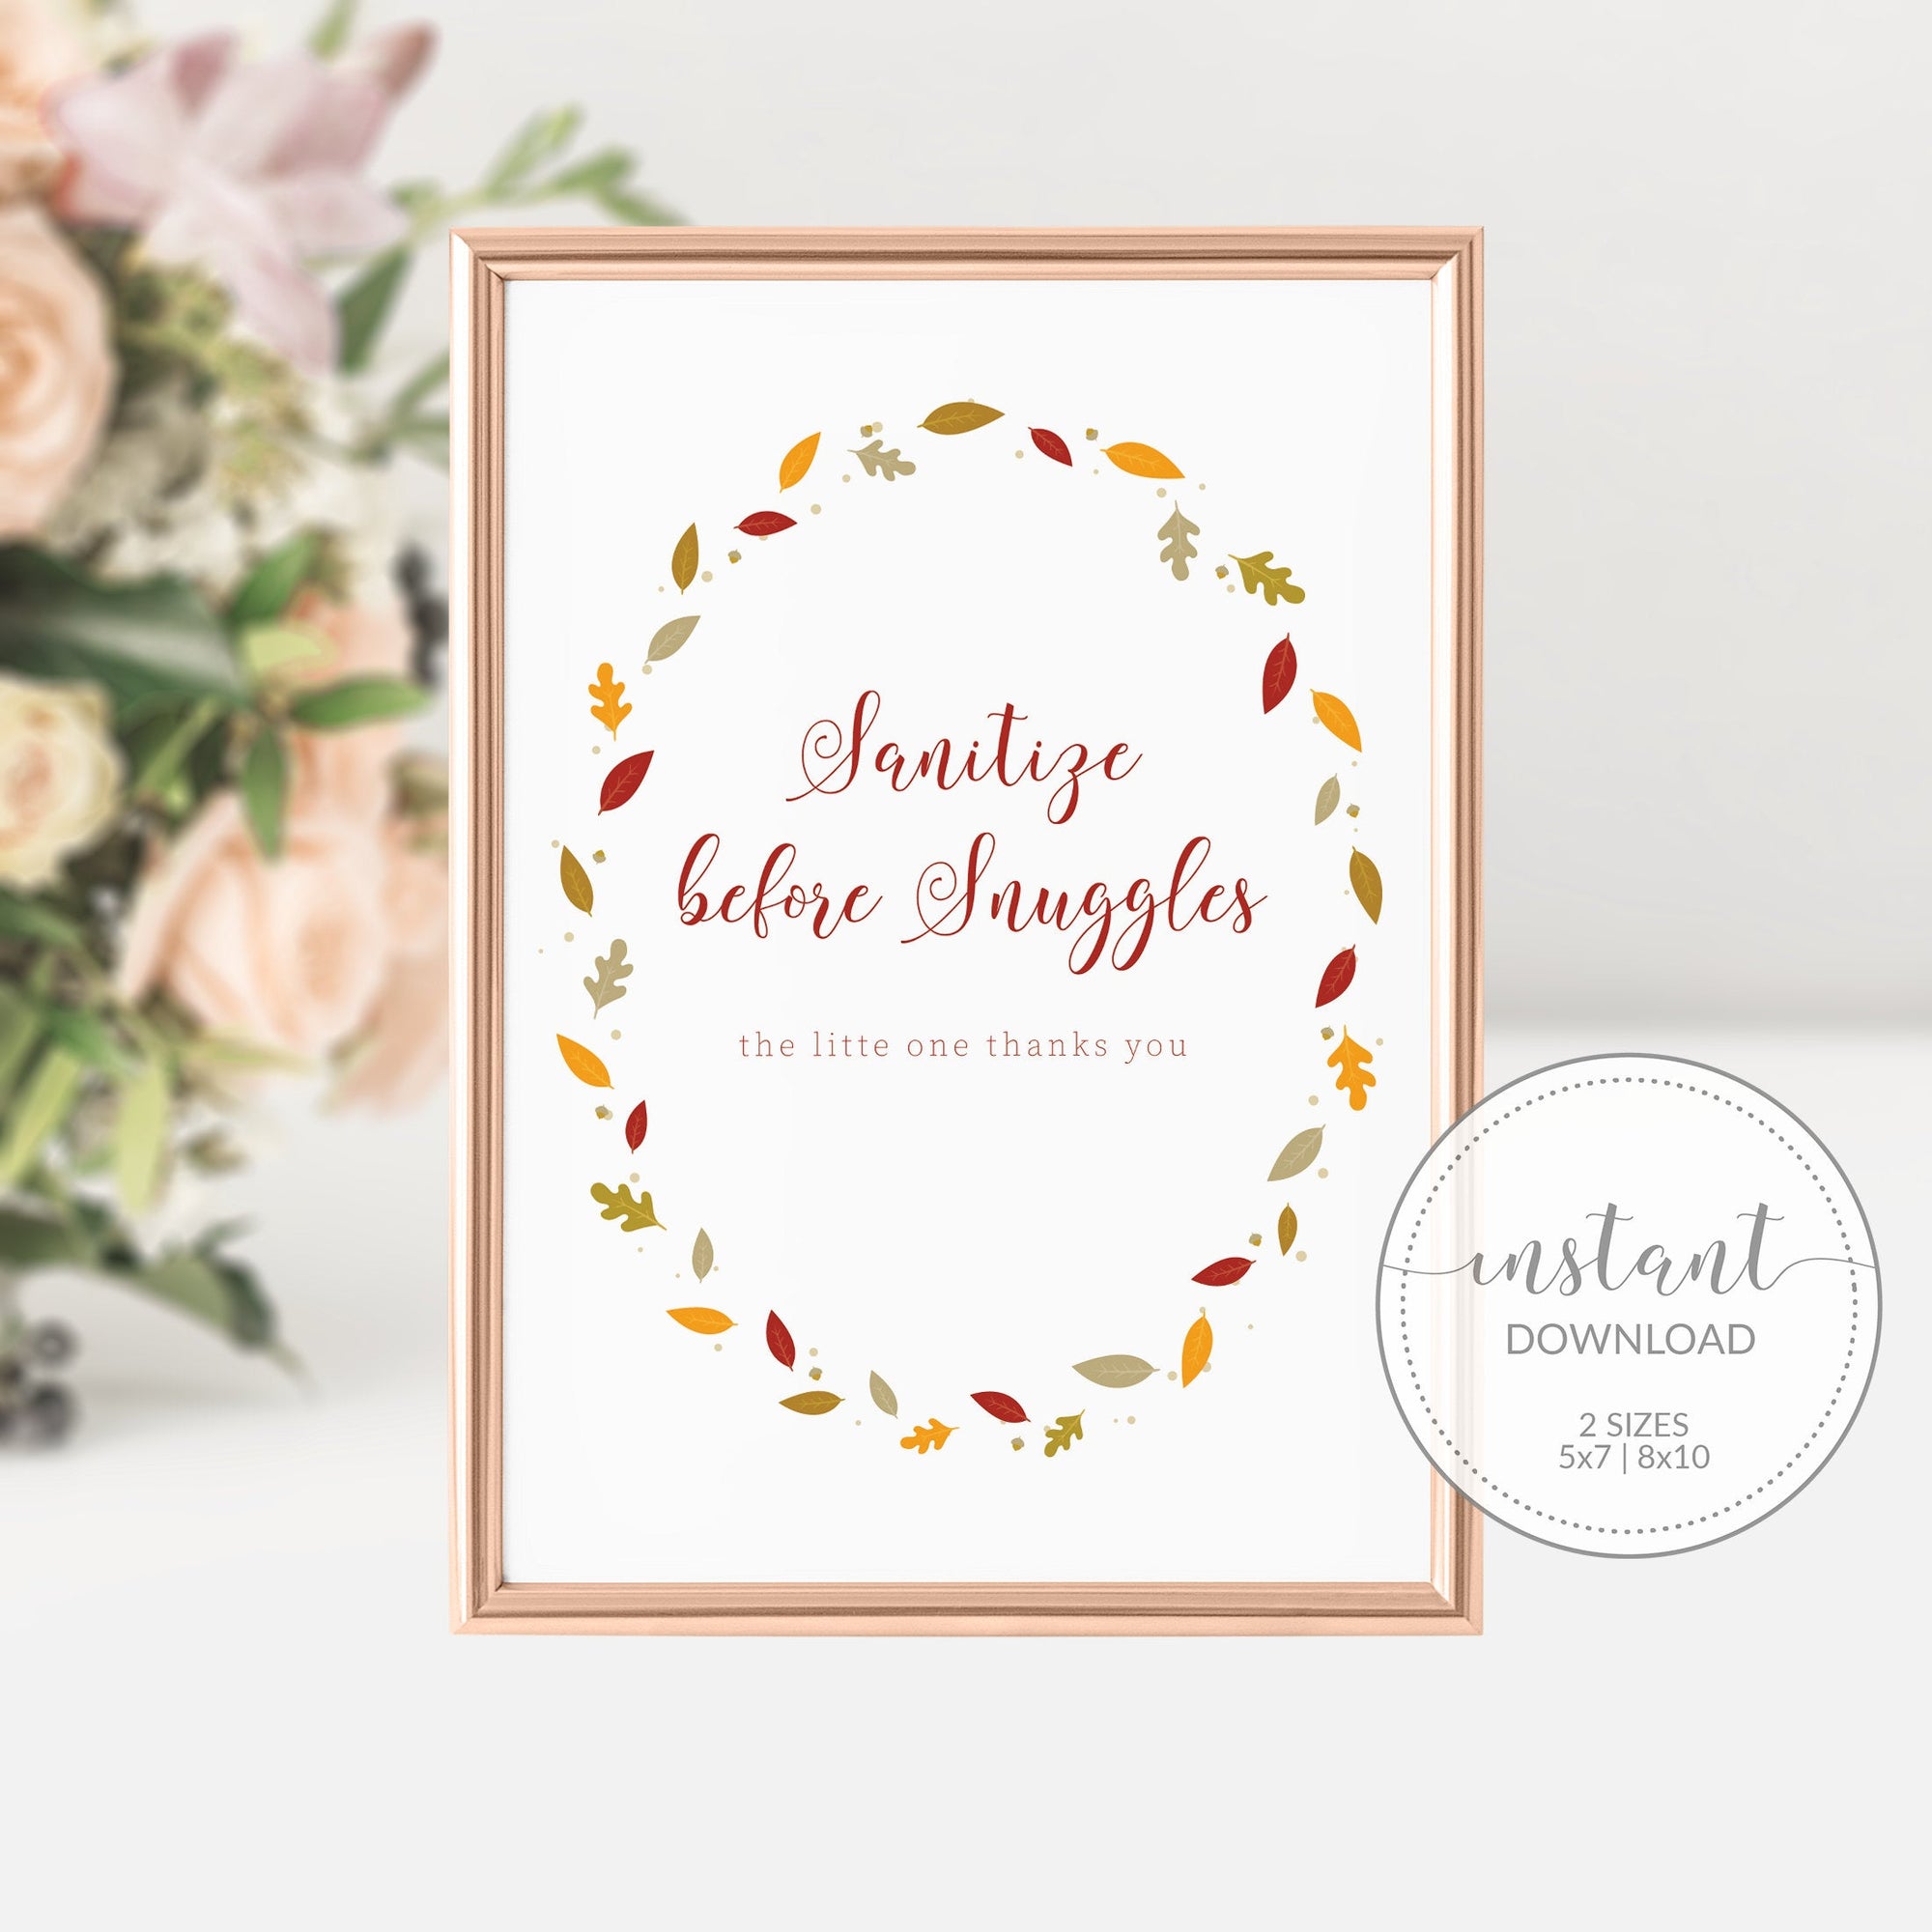 Fall Leaves Sanitize Before Snuggles Sign Printable, Thanksgiving Sip and See Baby Shower, INSTANT DOWNLOAD - FL100